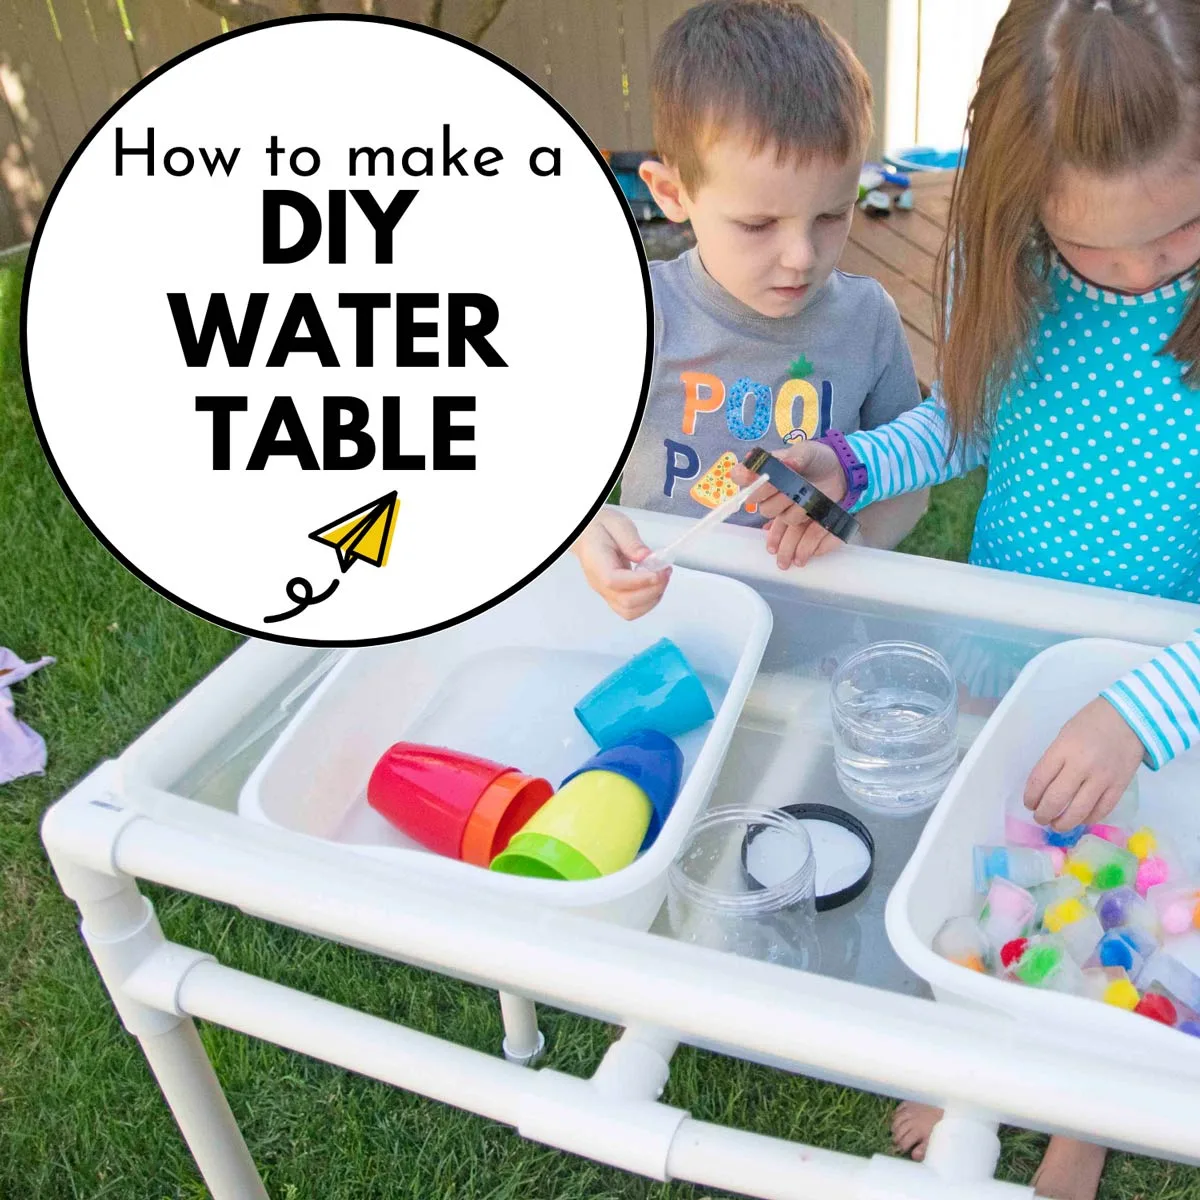 How to make a PVC Pipe Water Table: two children are playing at a DIY water table.